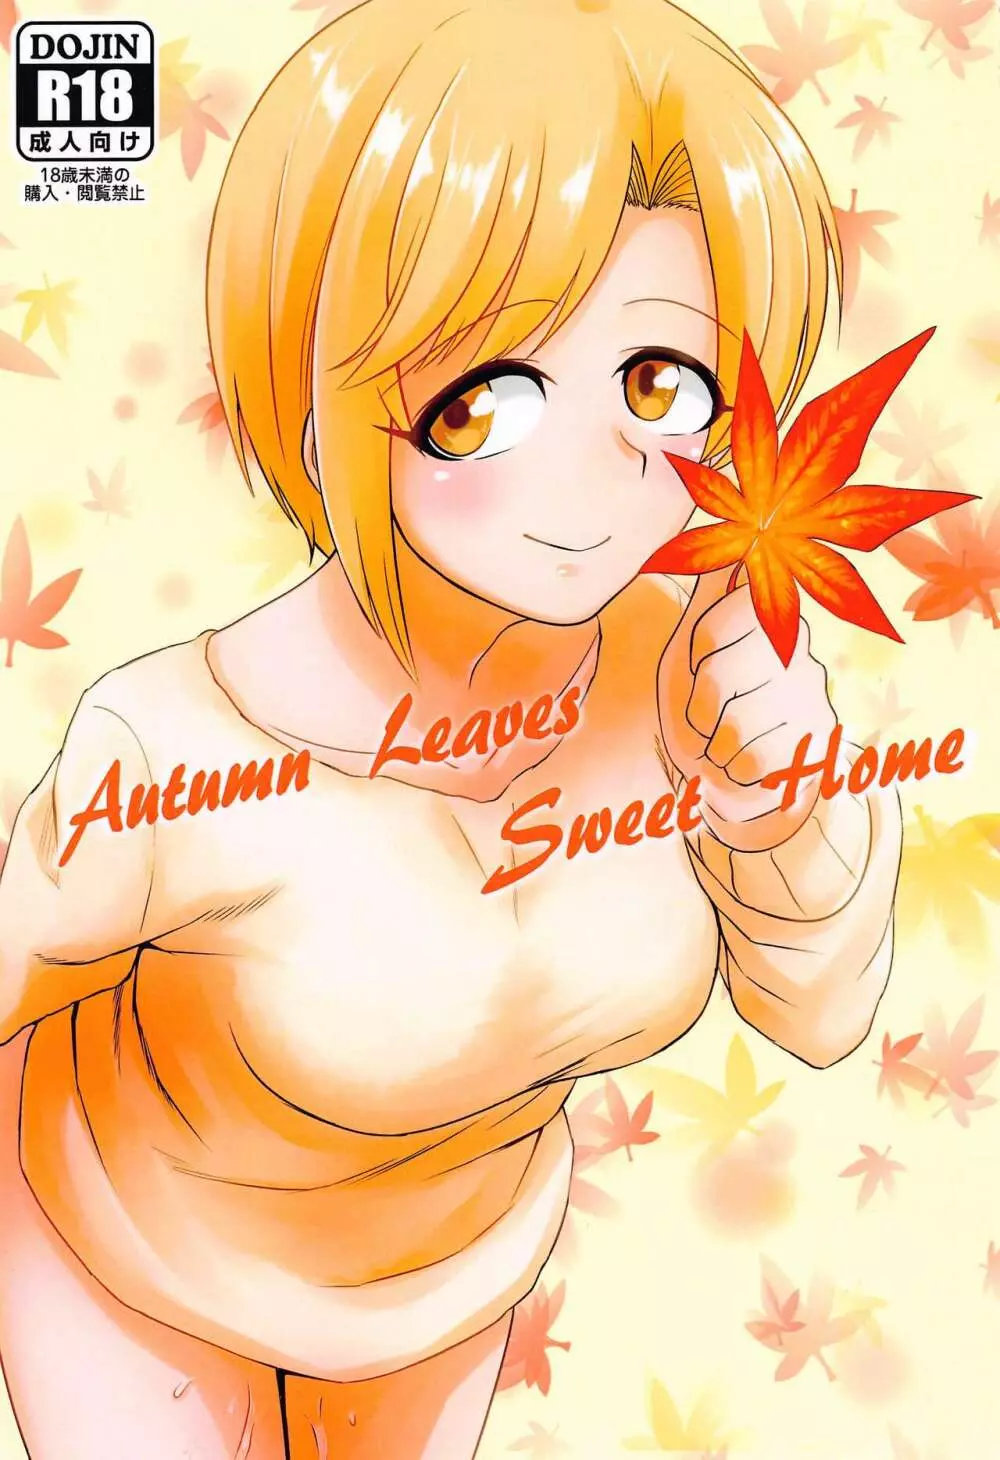 Autumn Leaves Sweet Home